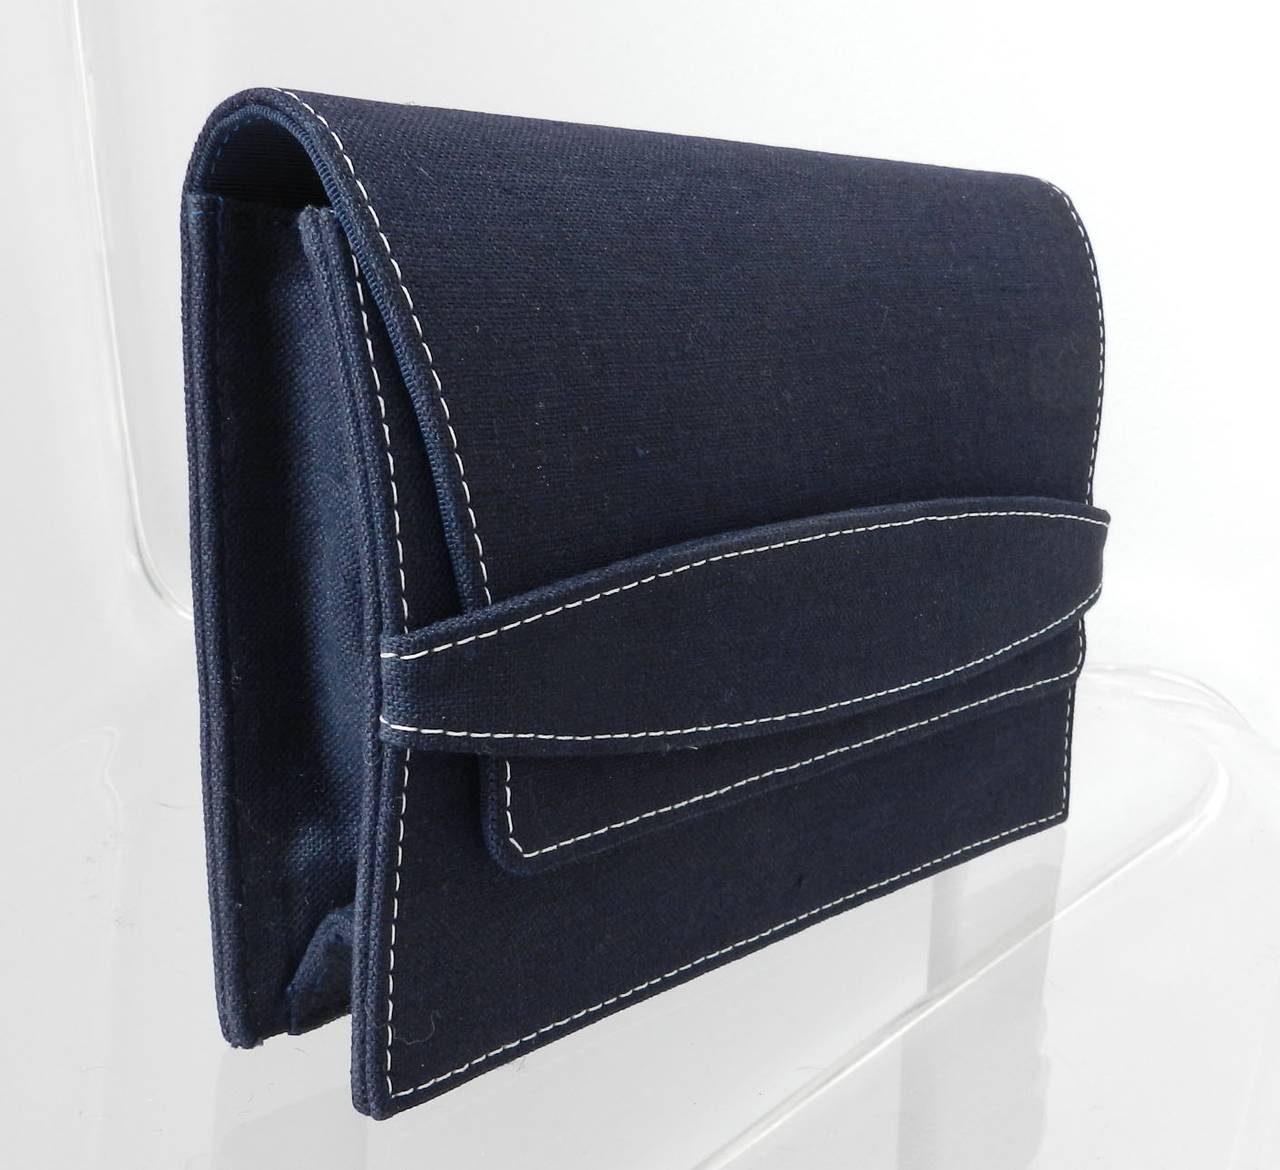 Yves Saint Laurent 1990's Navy cotton fabric envelope clutch. White top stitching, small zippered interior pocket, gold stamped logo on interior. Excellent condition. Measures about 9 x 6.5 x 2